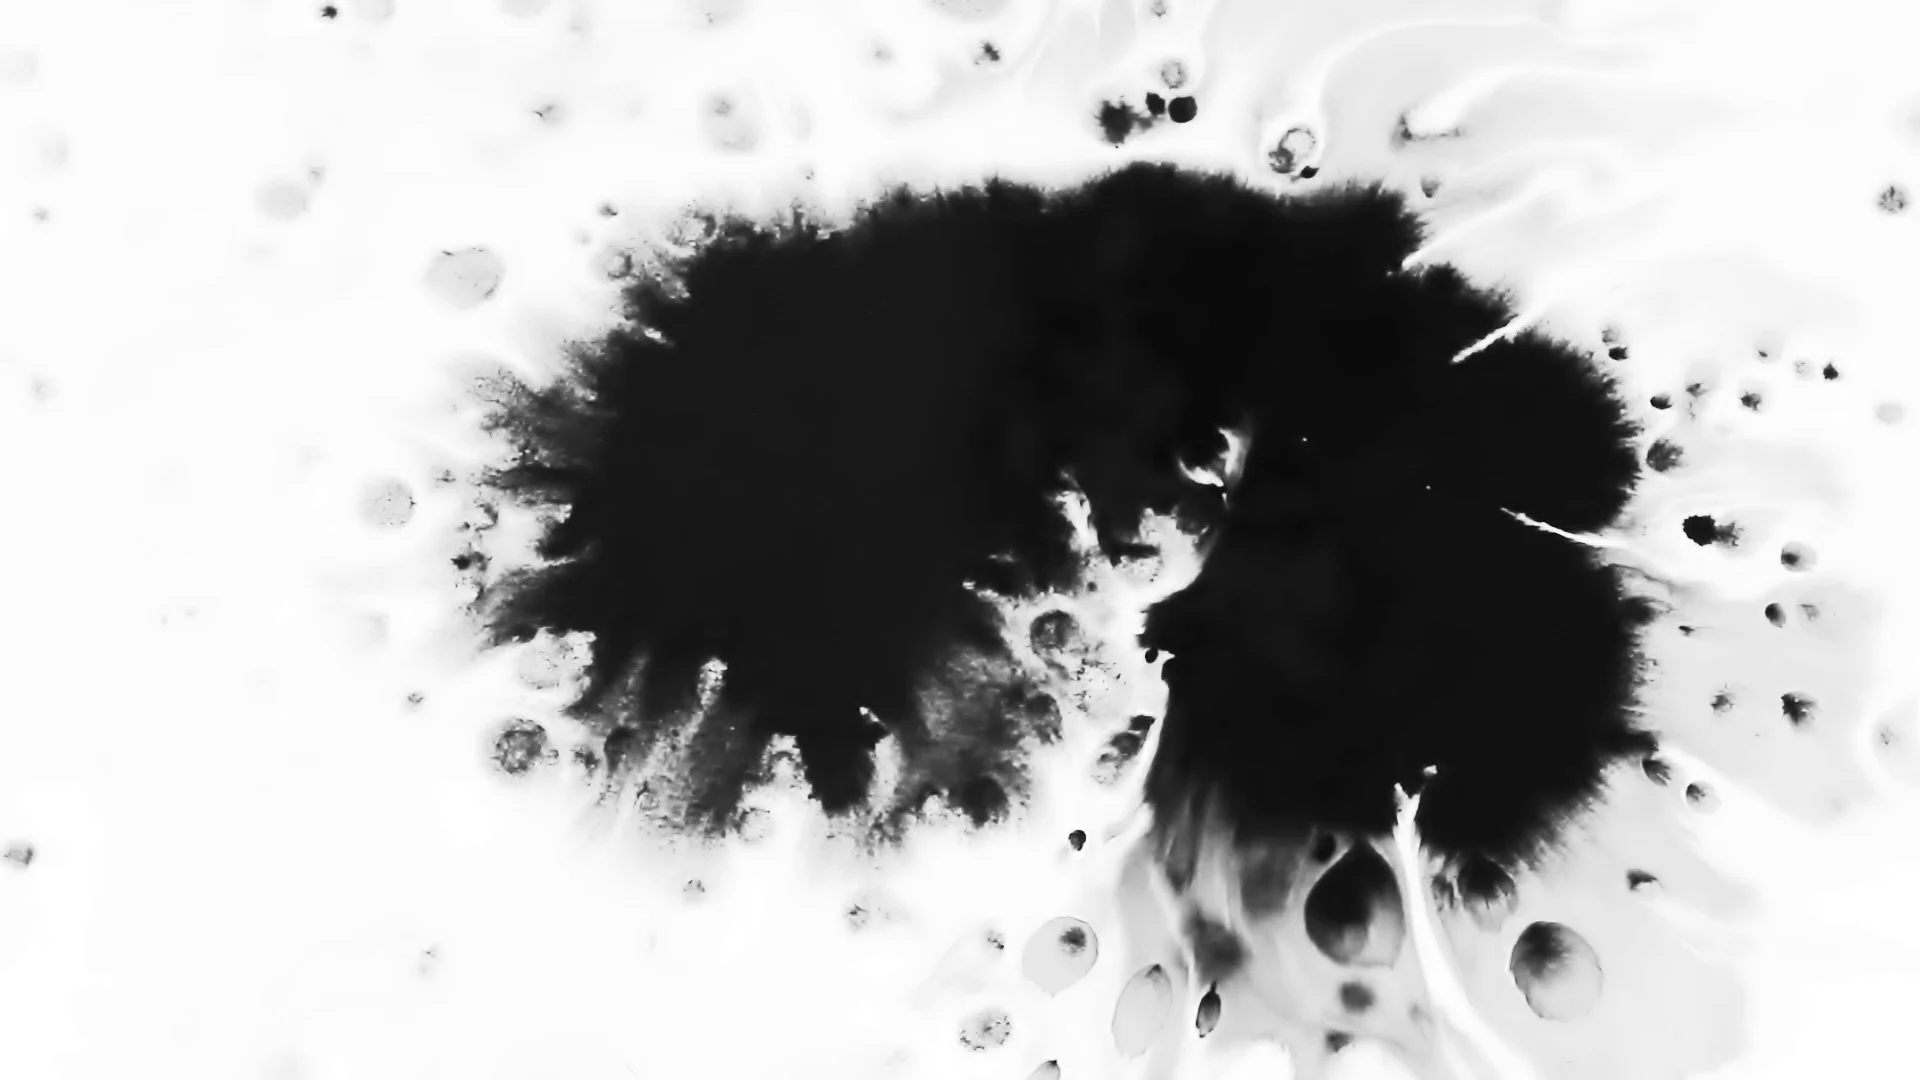 Black Ink Drop on White Background 43 | Stock Video | Pond5